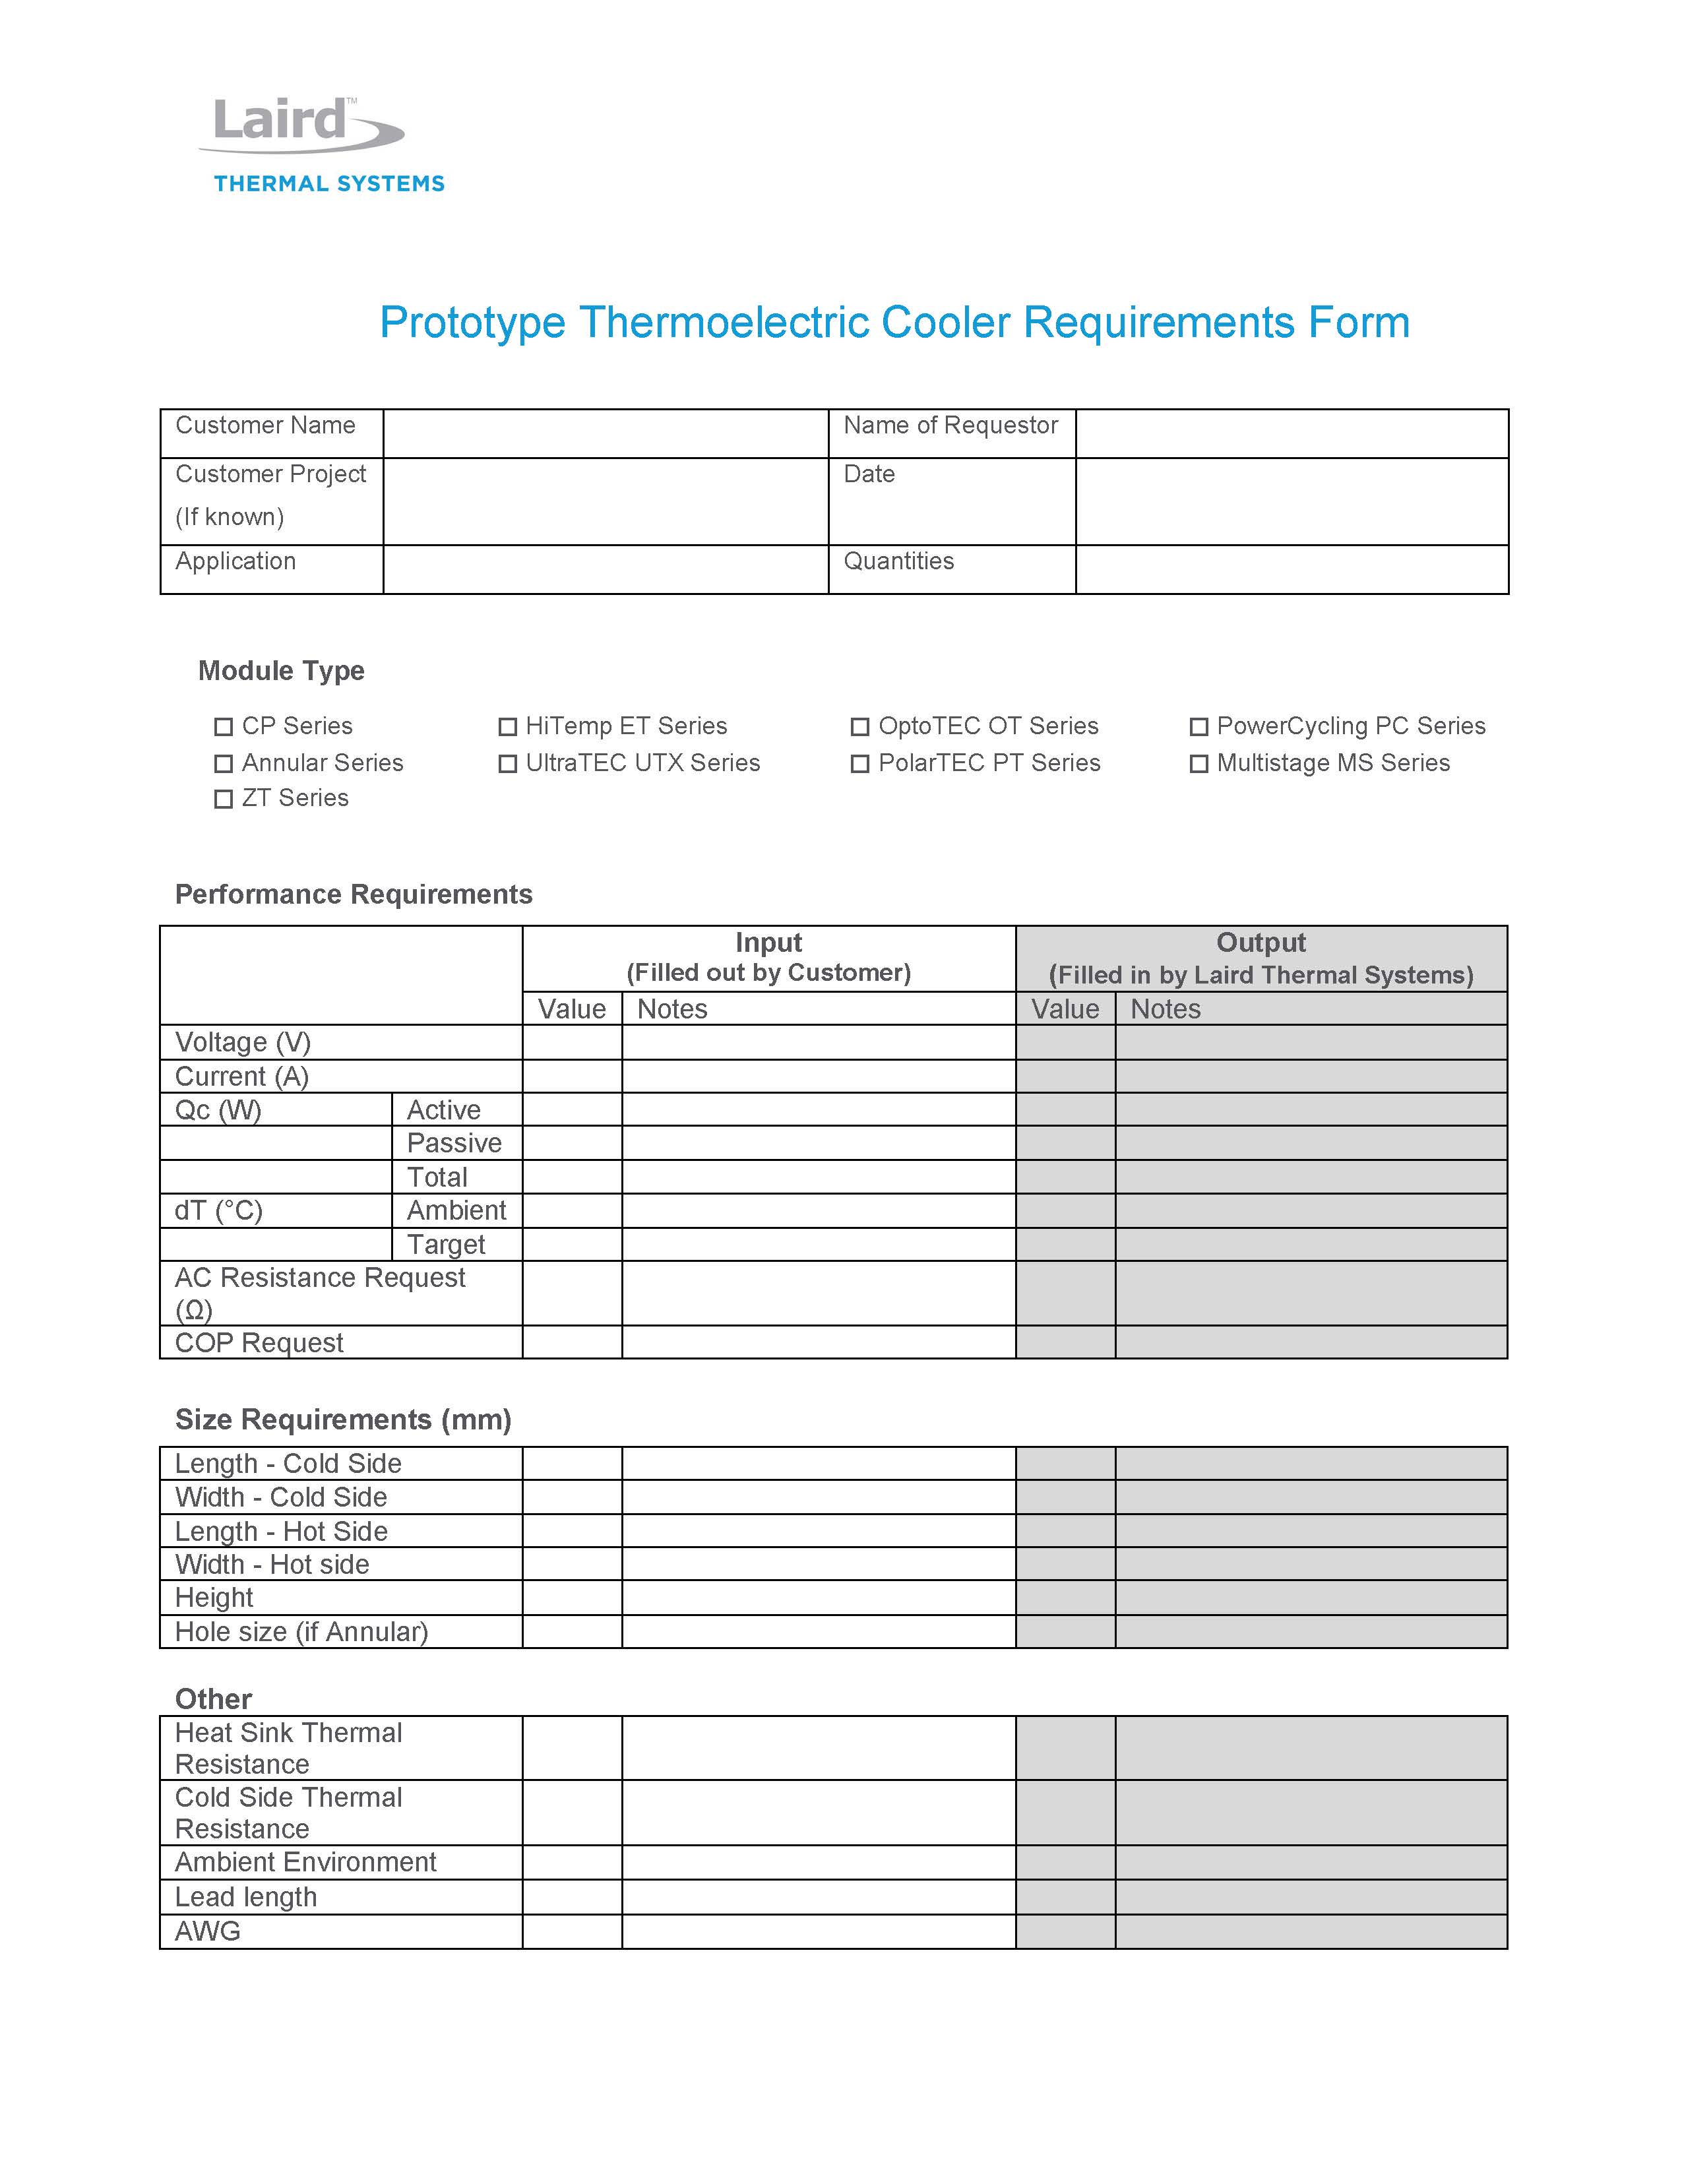 Prototype-Thermoelectric-Cooler-Requirements-Form